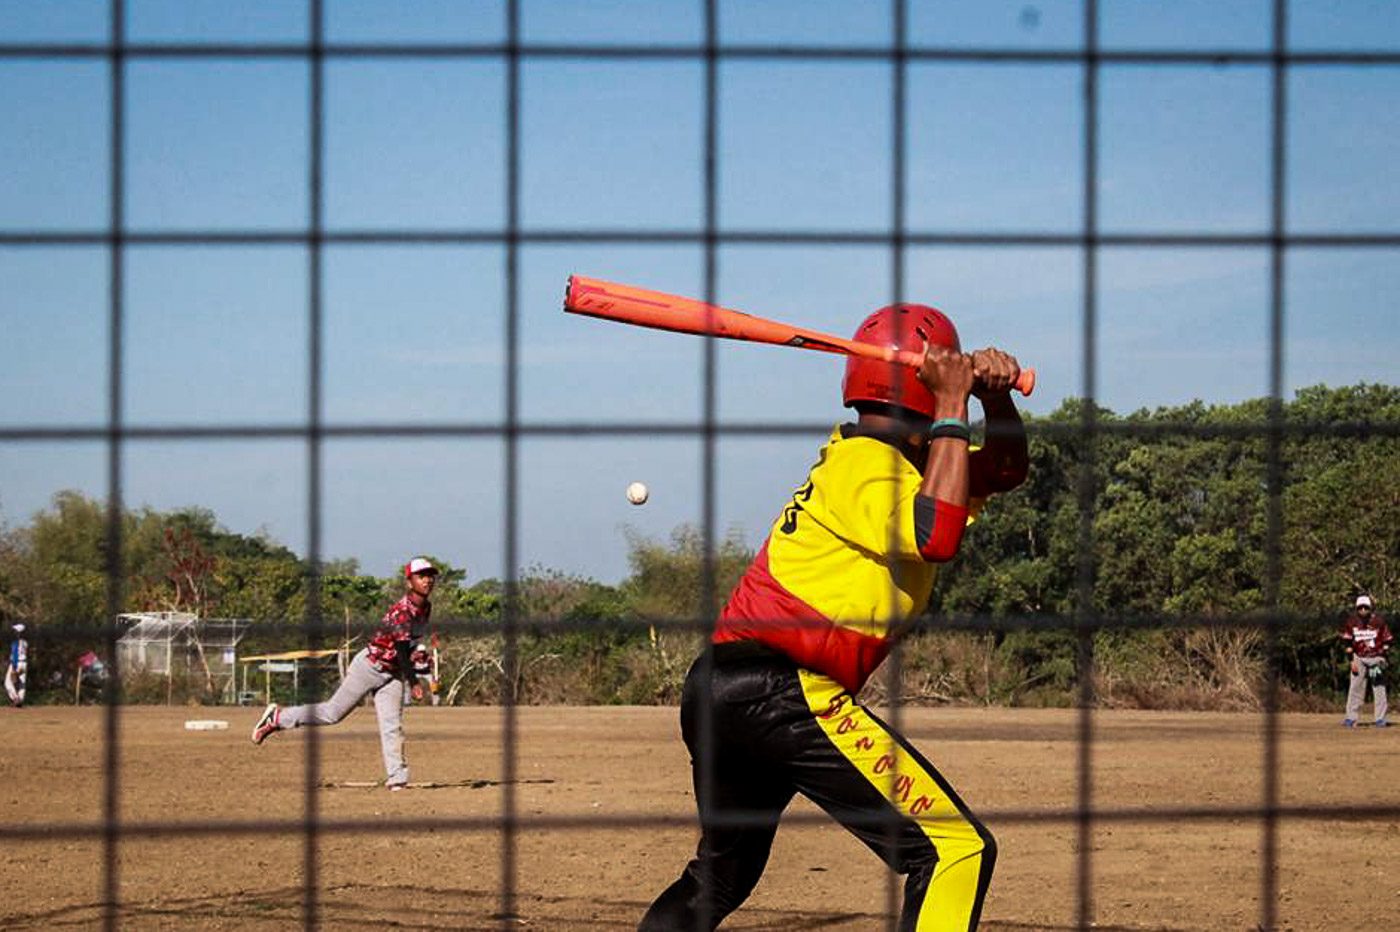 DETERMINATION. A batter from Team CARAGA tries to hit the ball during the first inning of the Boys Baseball, secondary level match. Region IV-A won the game. Photo by Ed Ryan/ Rappler 